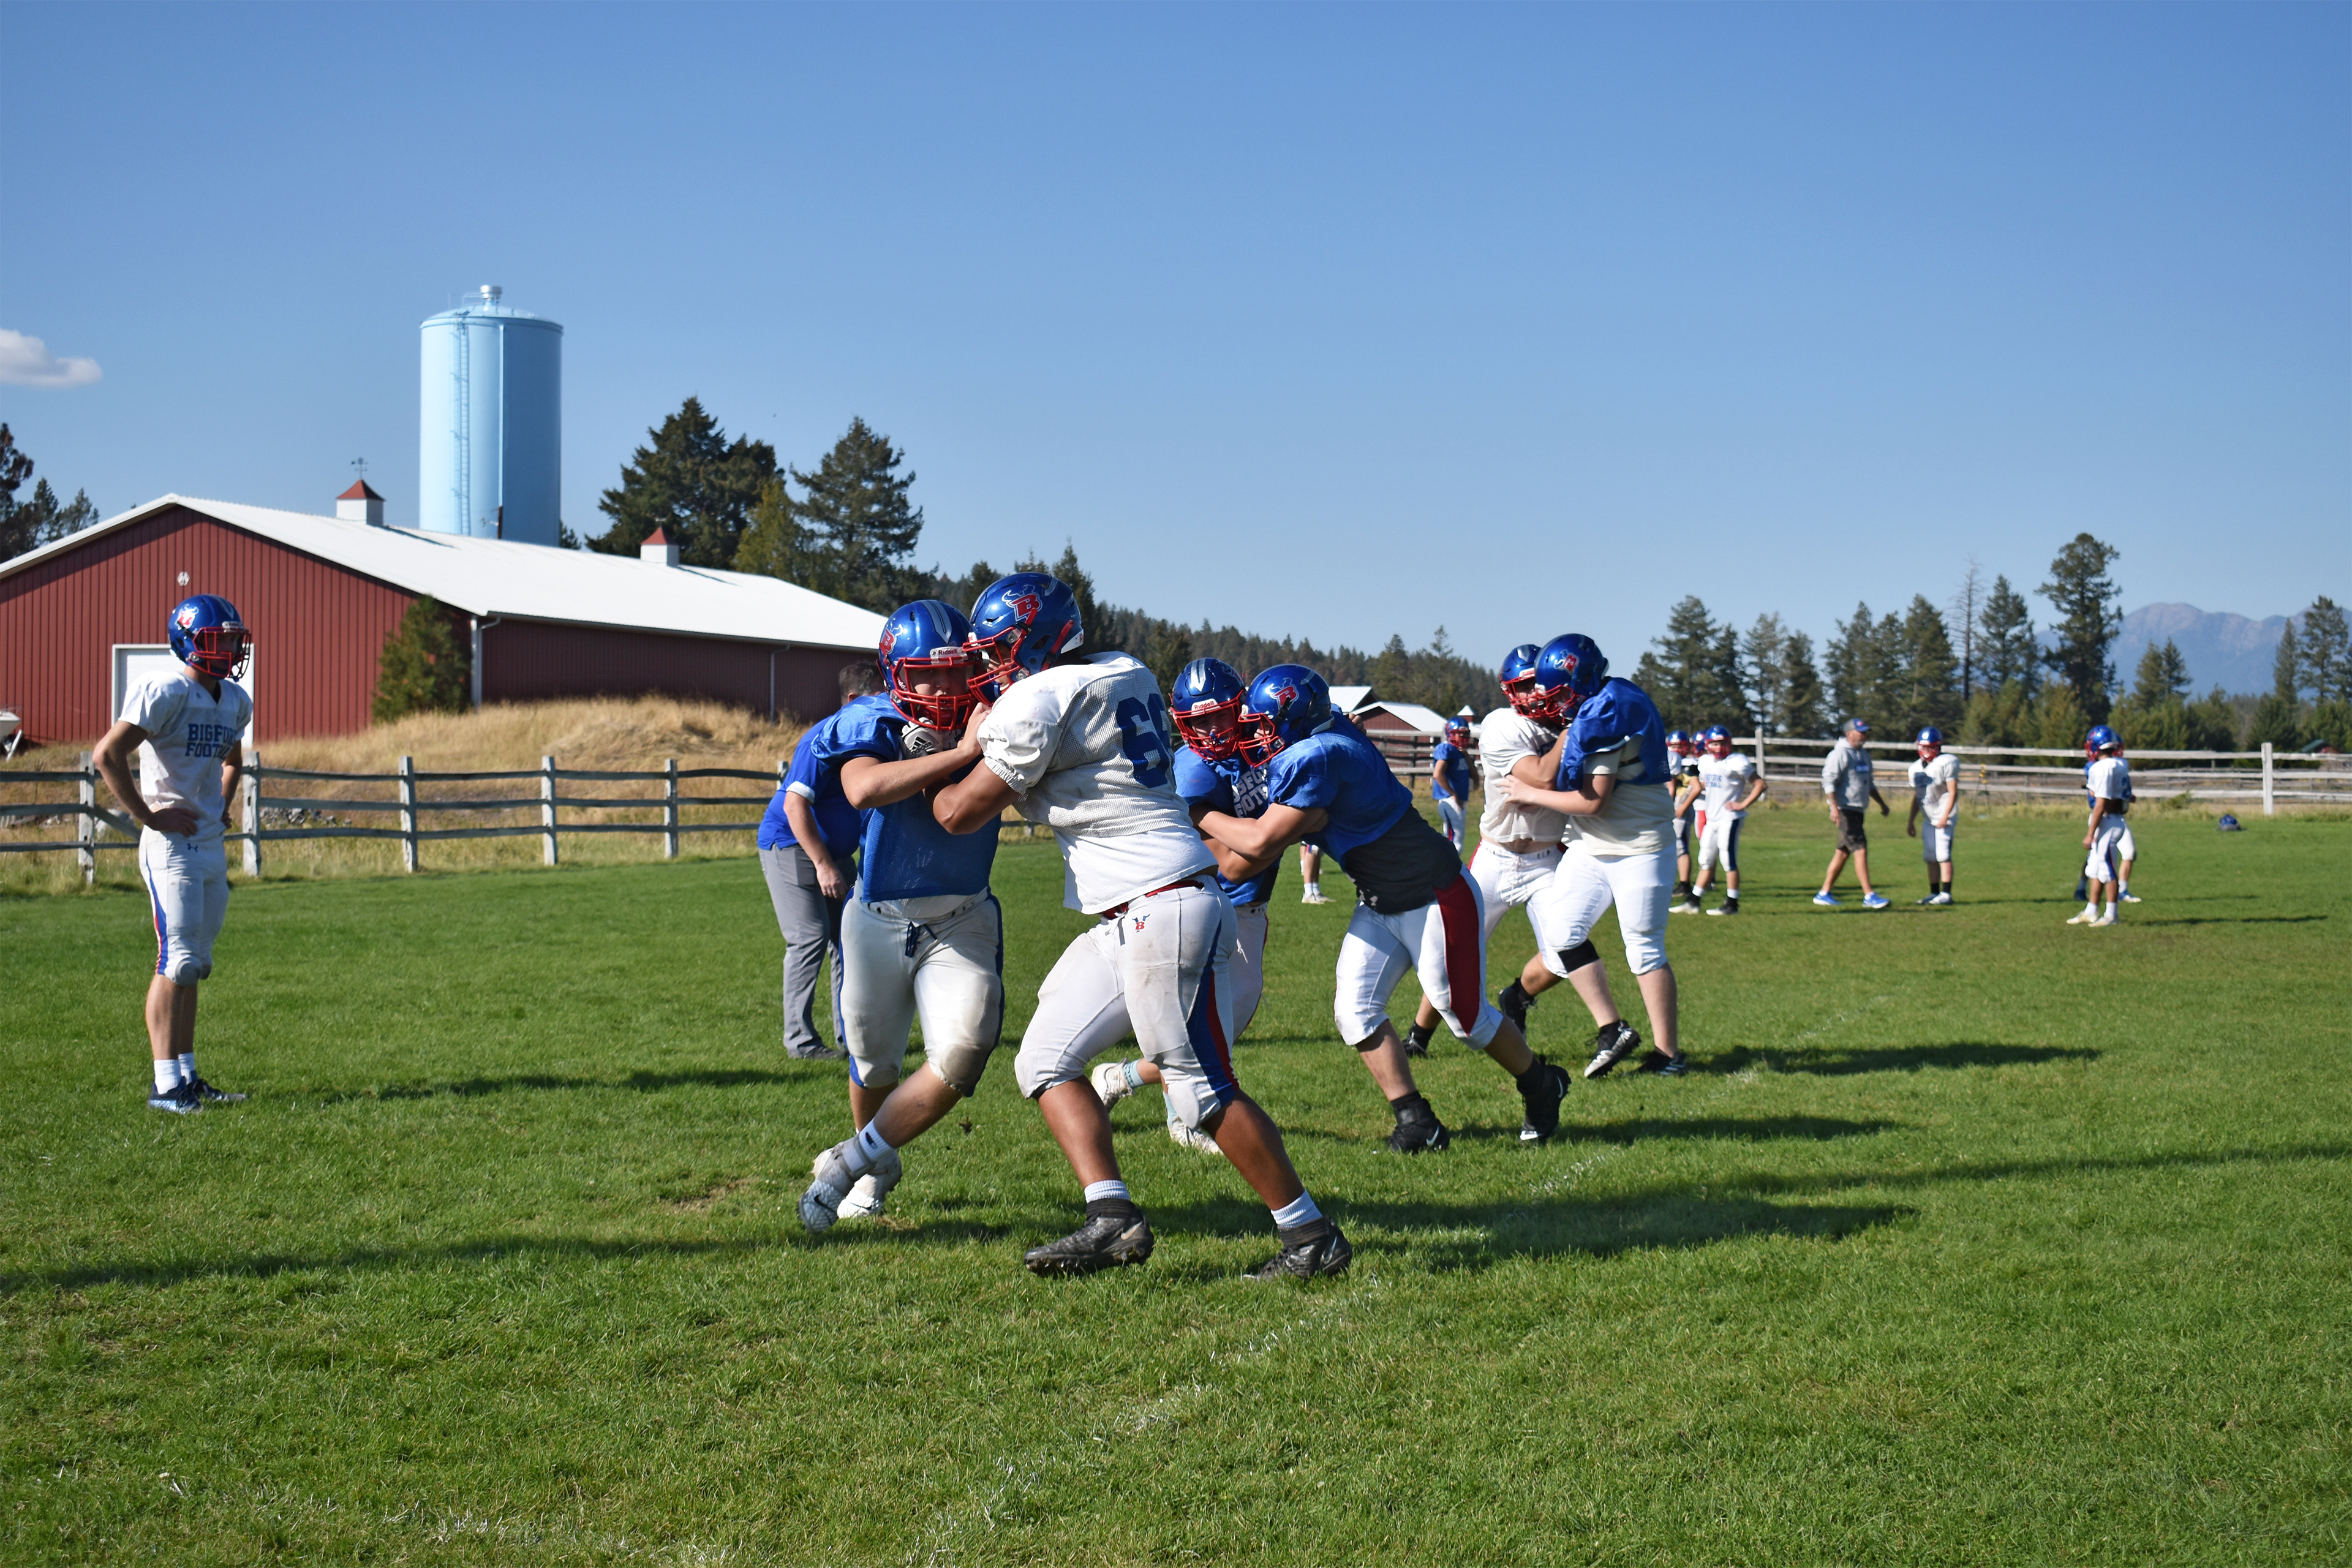 A photo shows members of the Bigfork Vikings football team practicing together on the field.